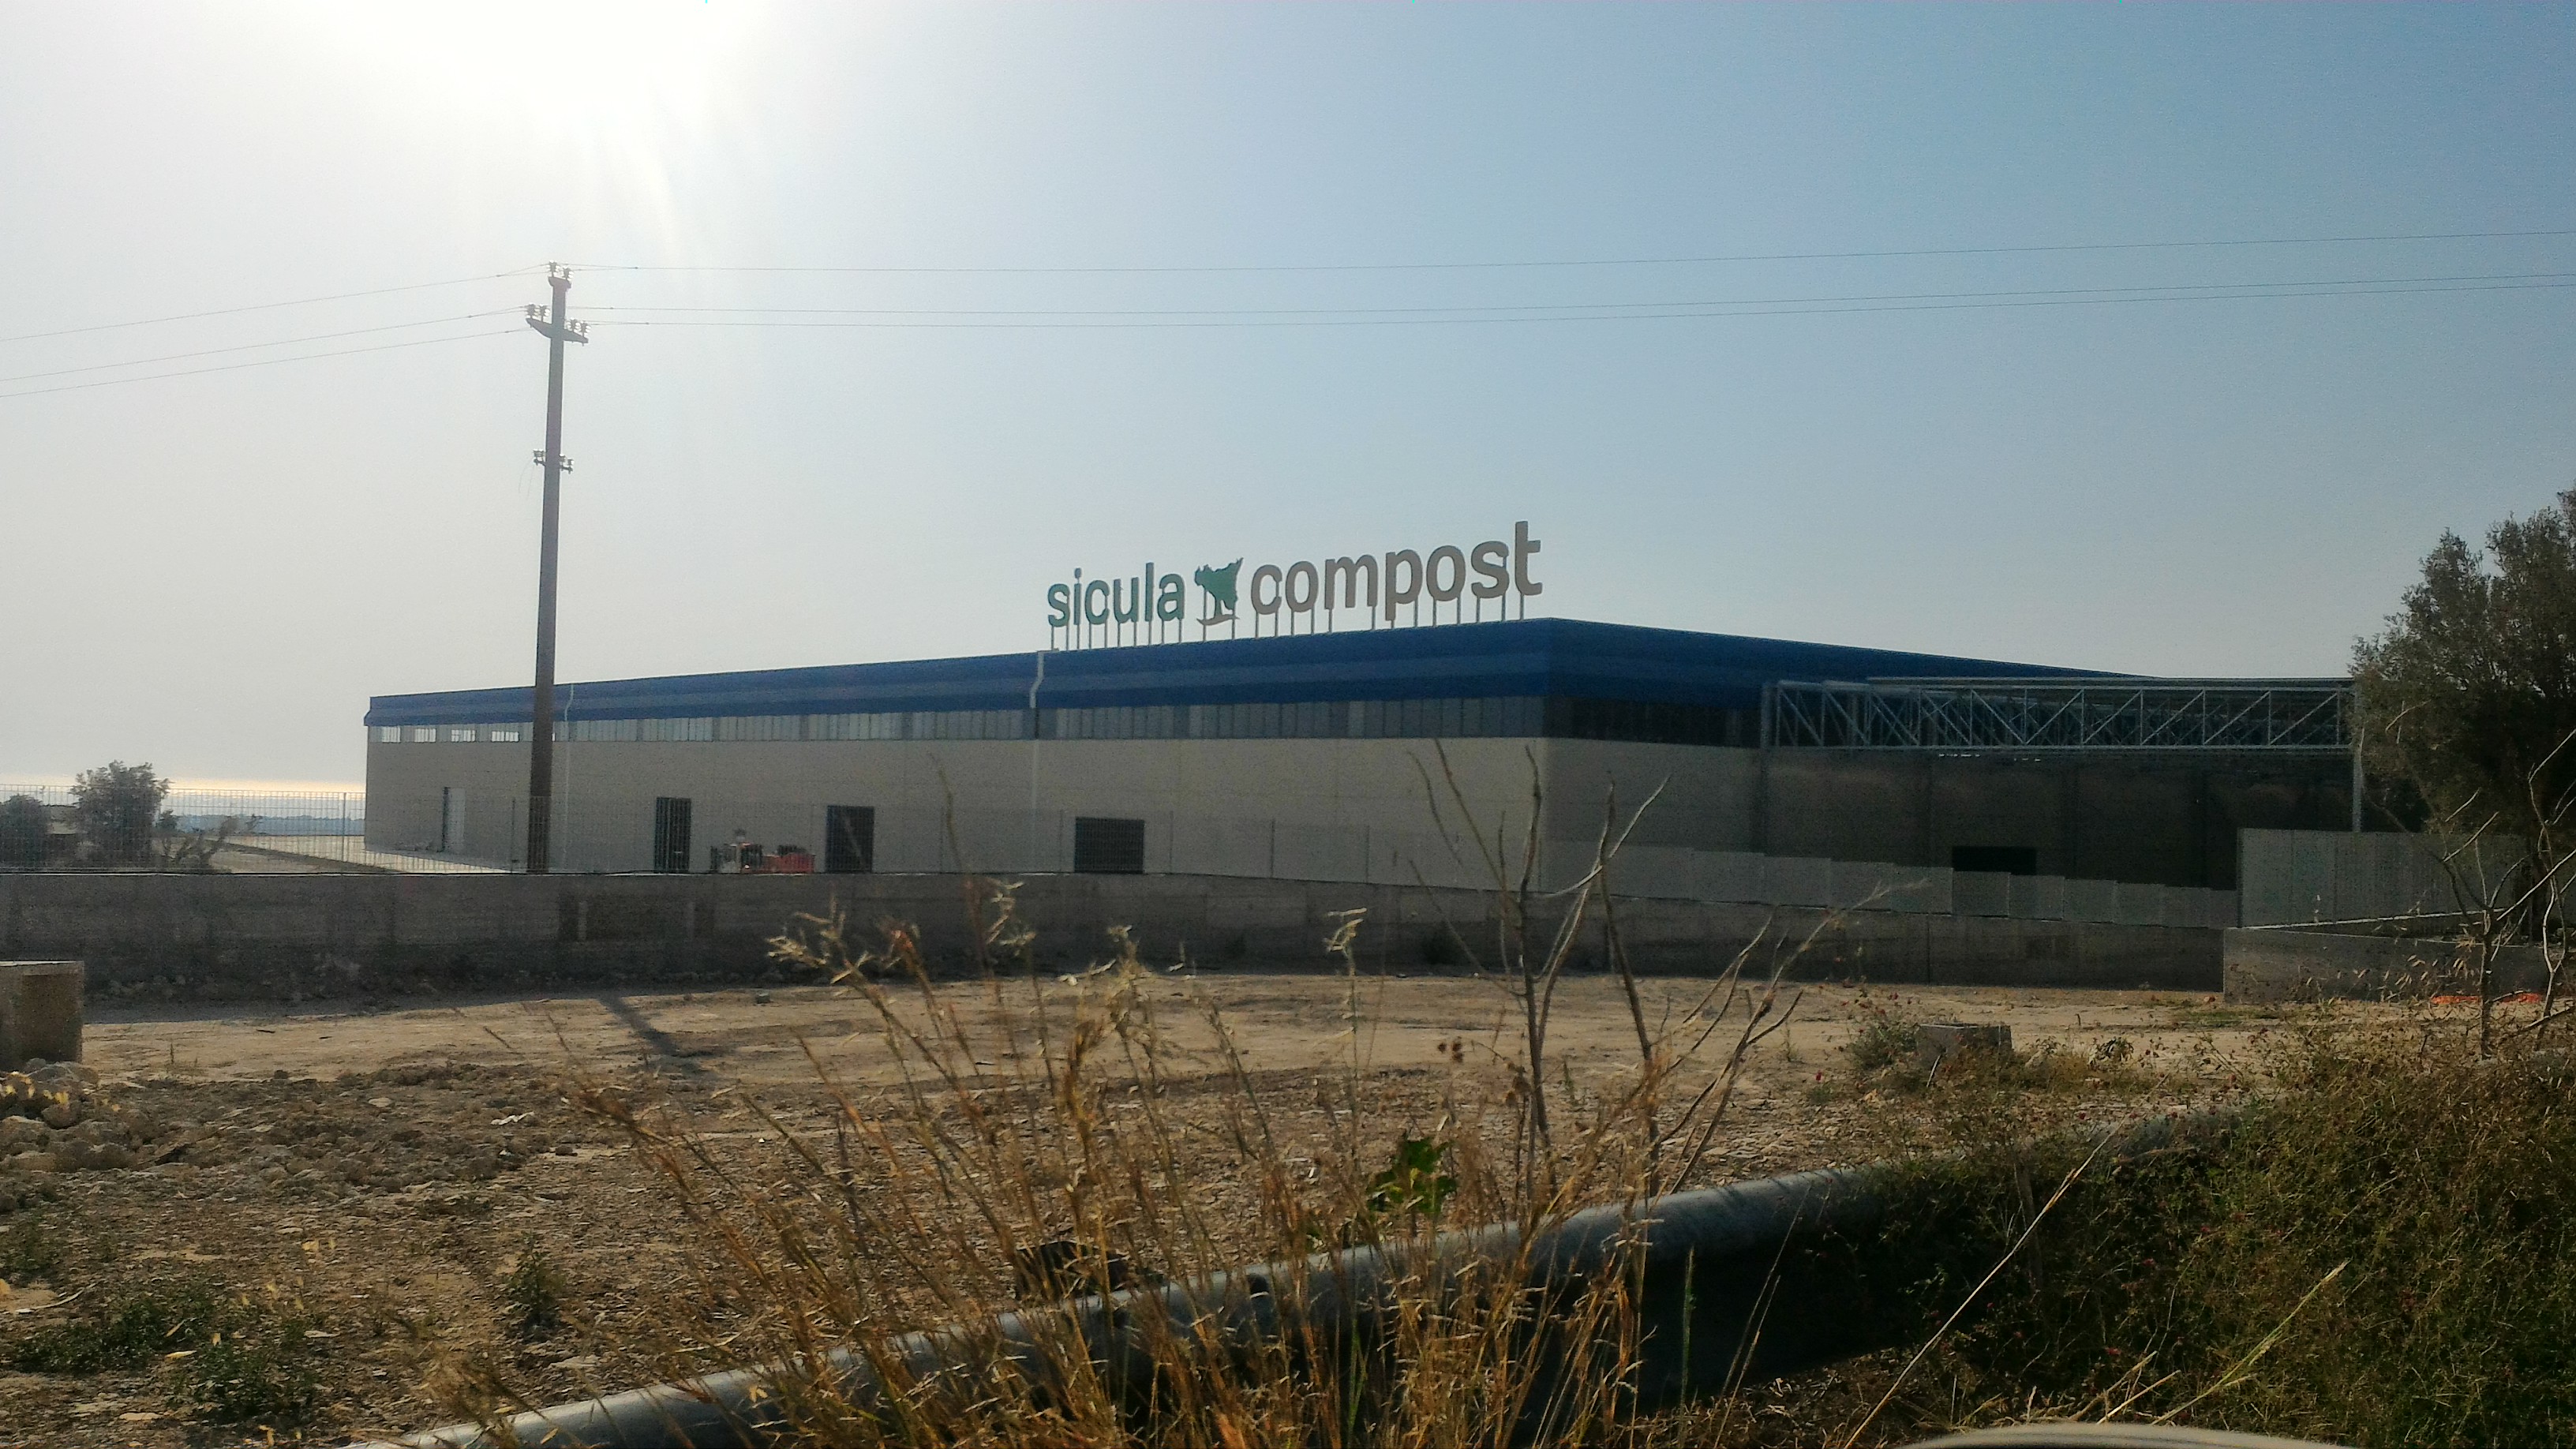 “Sicula Compost” composting plant construction work